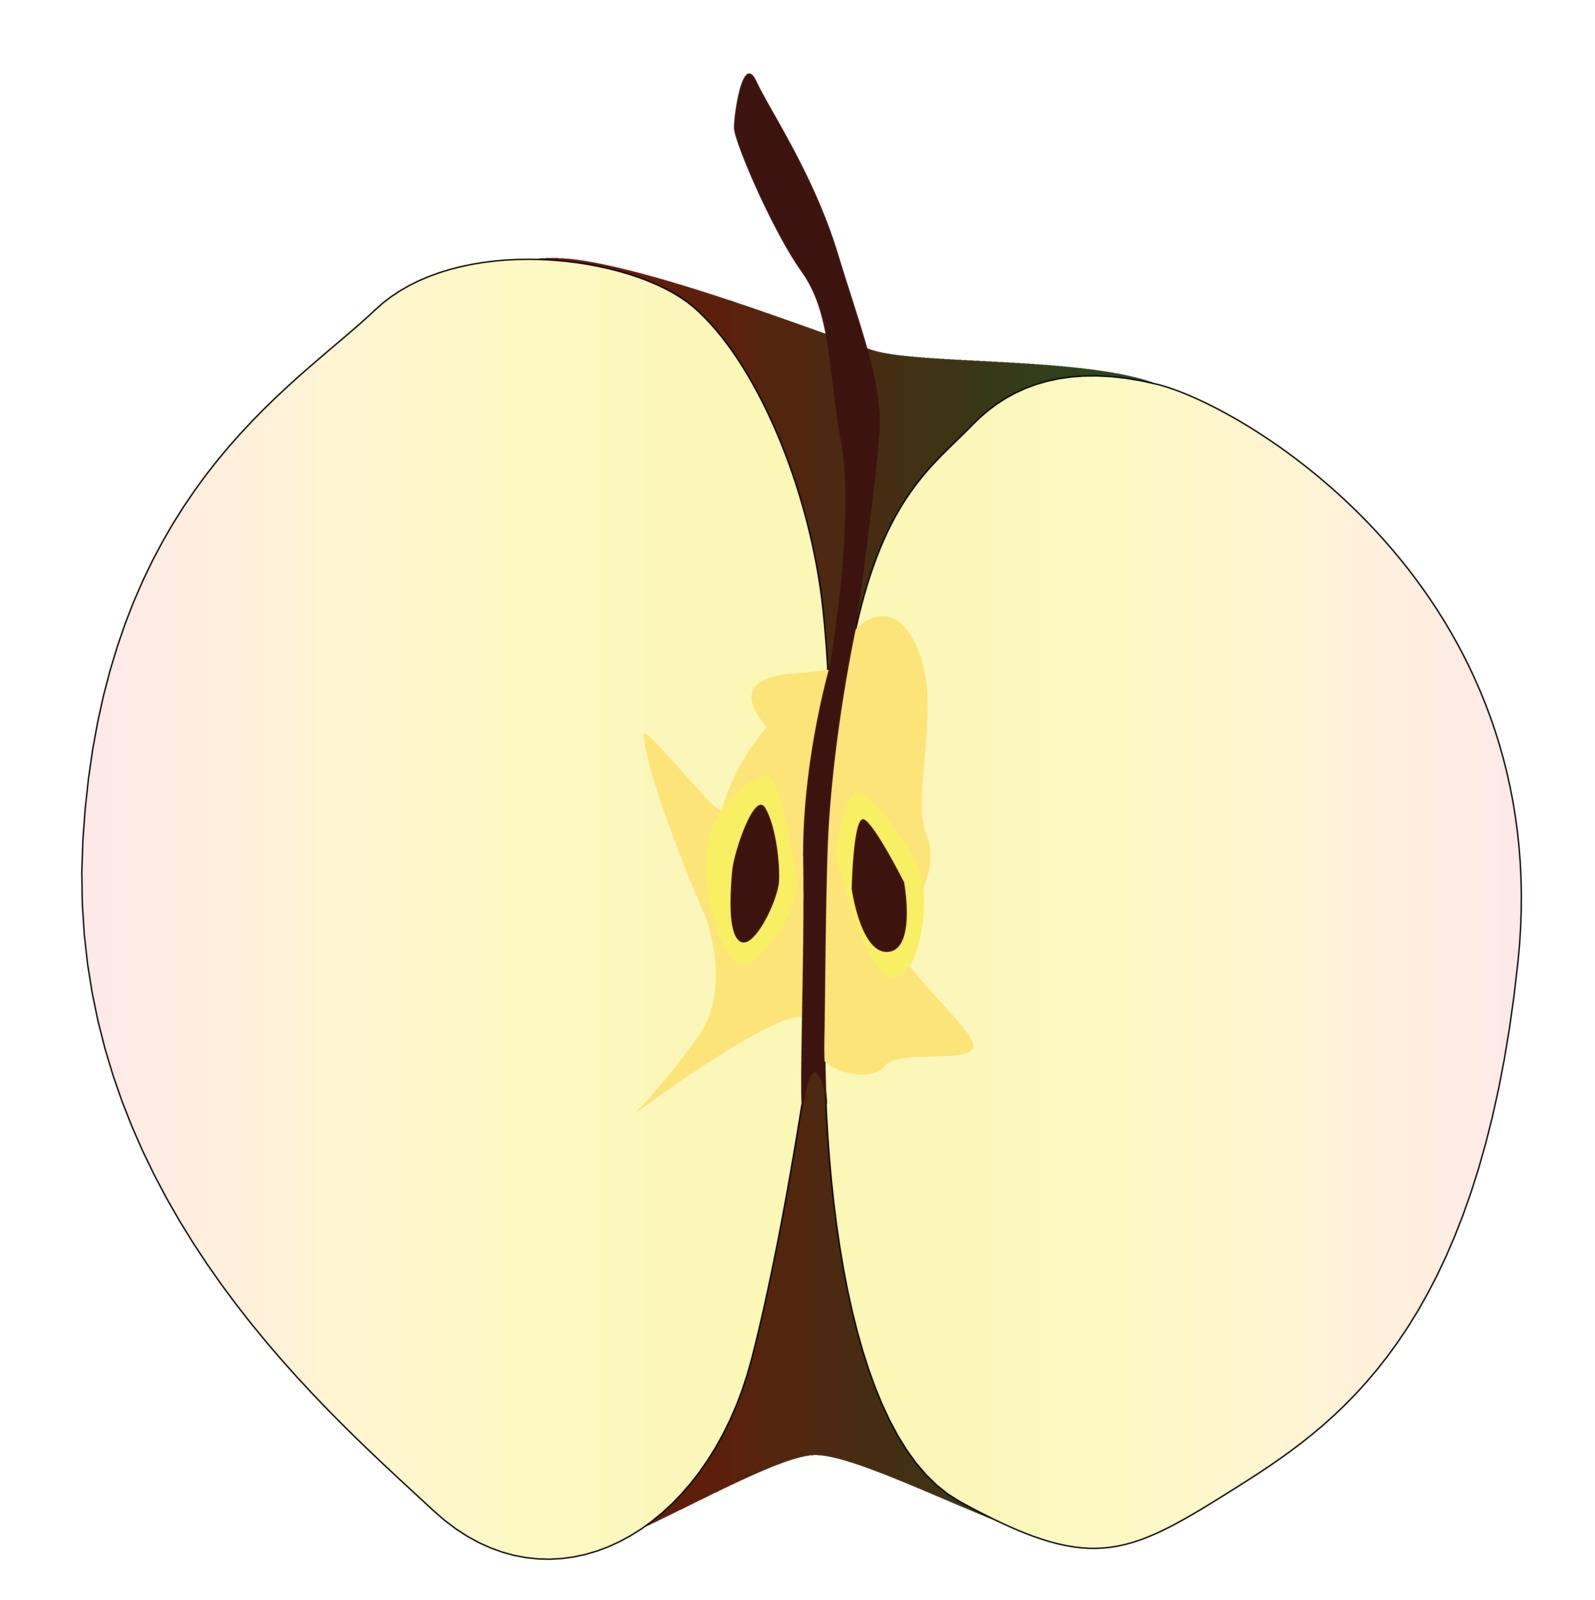 A typical apple cut in half set against a white background